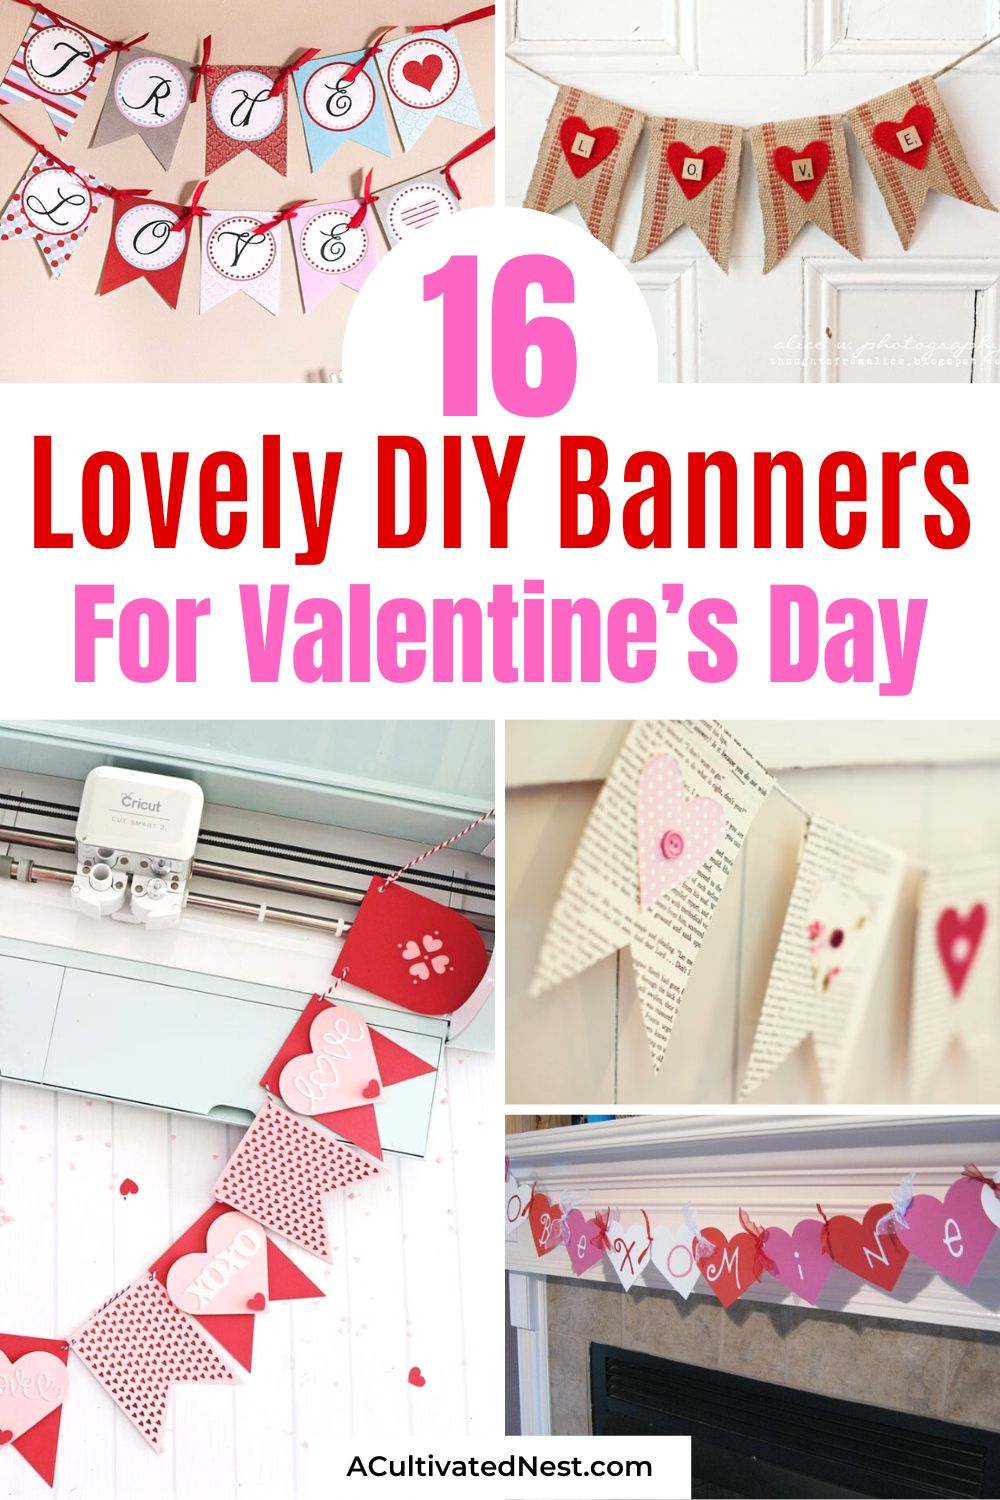  16 Lovely DIY Valentine's Day Banners- Get ready to spread the love! Dive into the world of heartfelt decorations with our collection of lovely DIY Valentine's Day banners. Perfect for crafting enthusiasts or those new to DIY, these ideas will make your home radiate with love. | #ValentinesDay #DIYDecor #crafts #diyBanners #ACultivatedNest